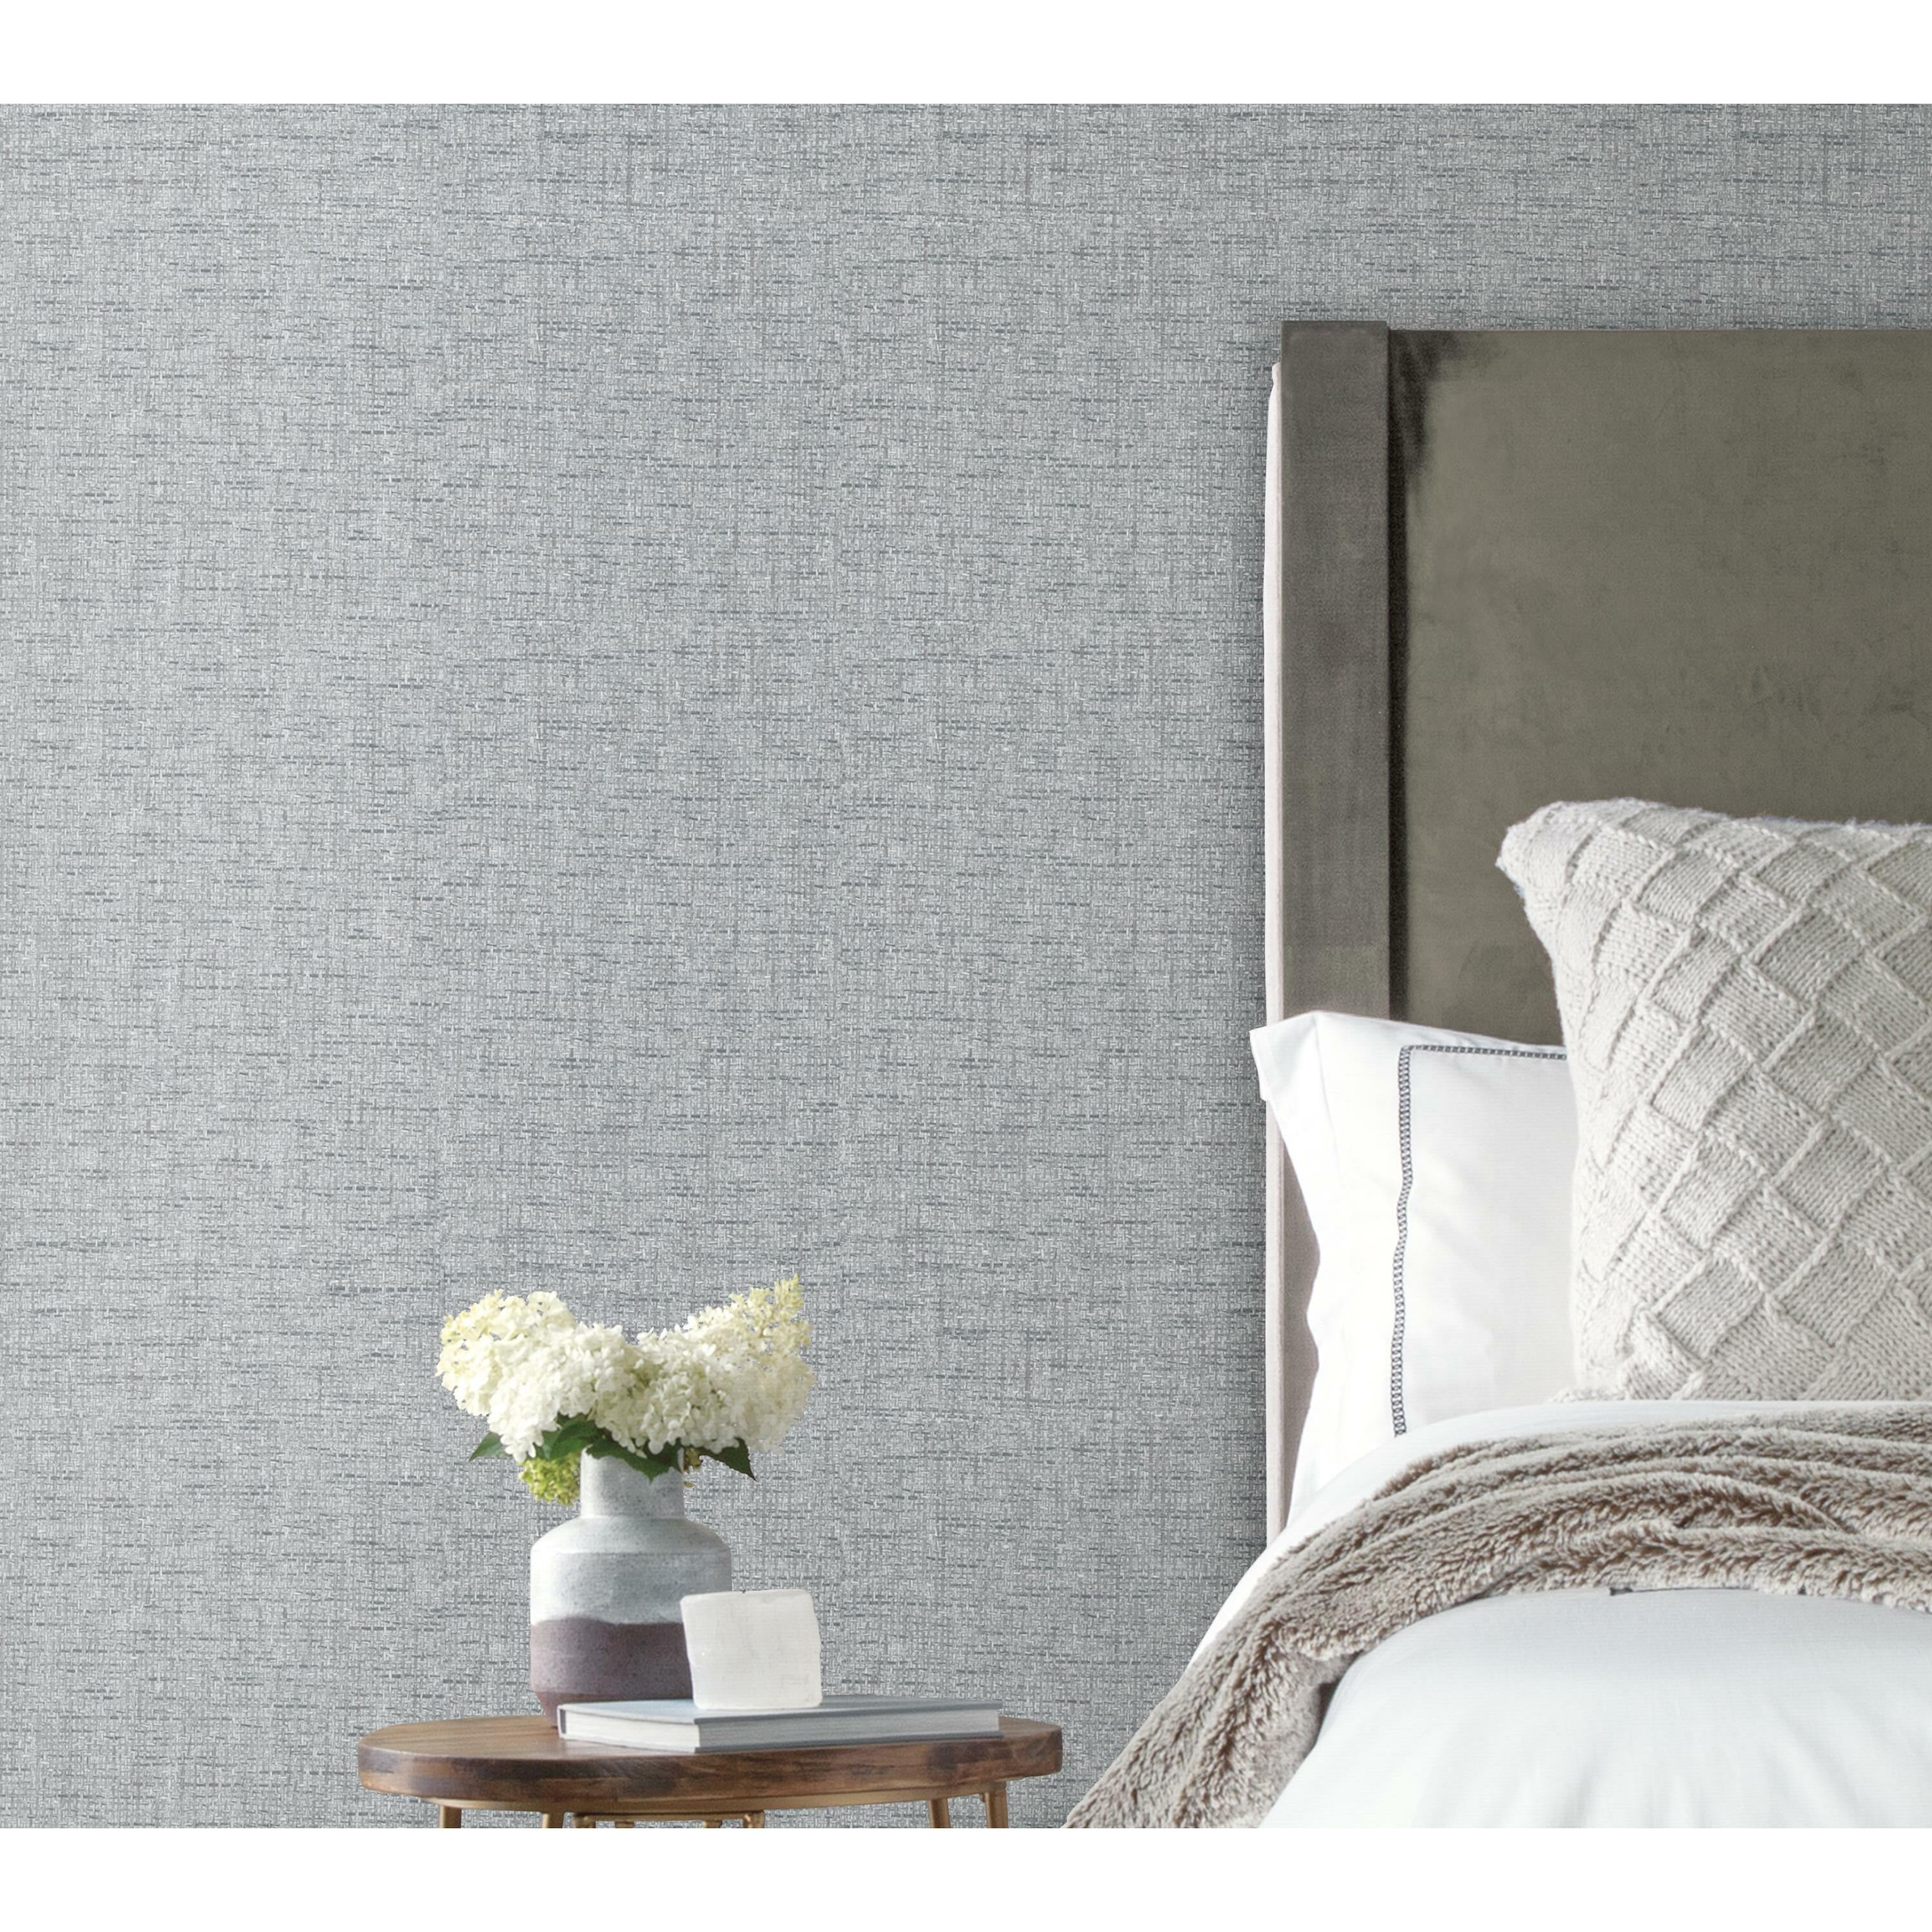 Faux Grasscloth Peel Stick Wallpaper  Amazing Wallpaper You Can Buy on  Amazon  POPSUGAR Home Photo 11